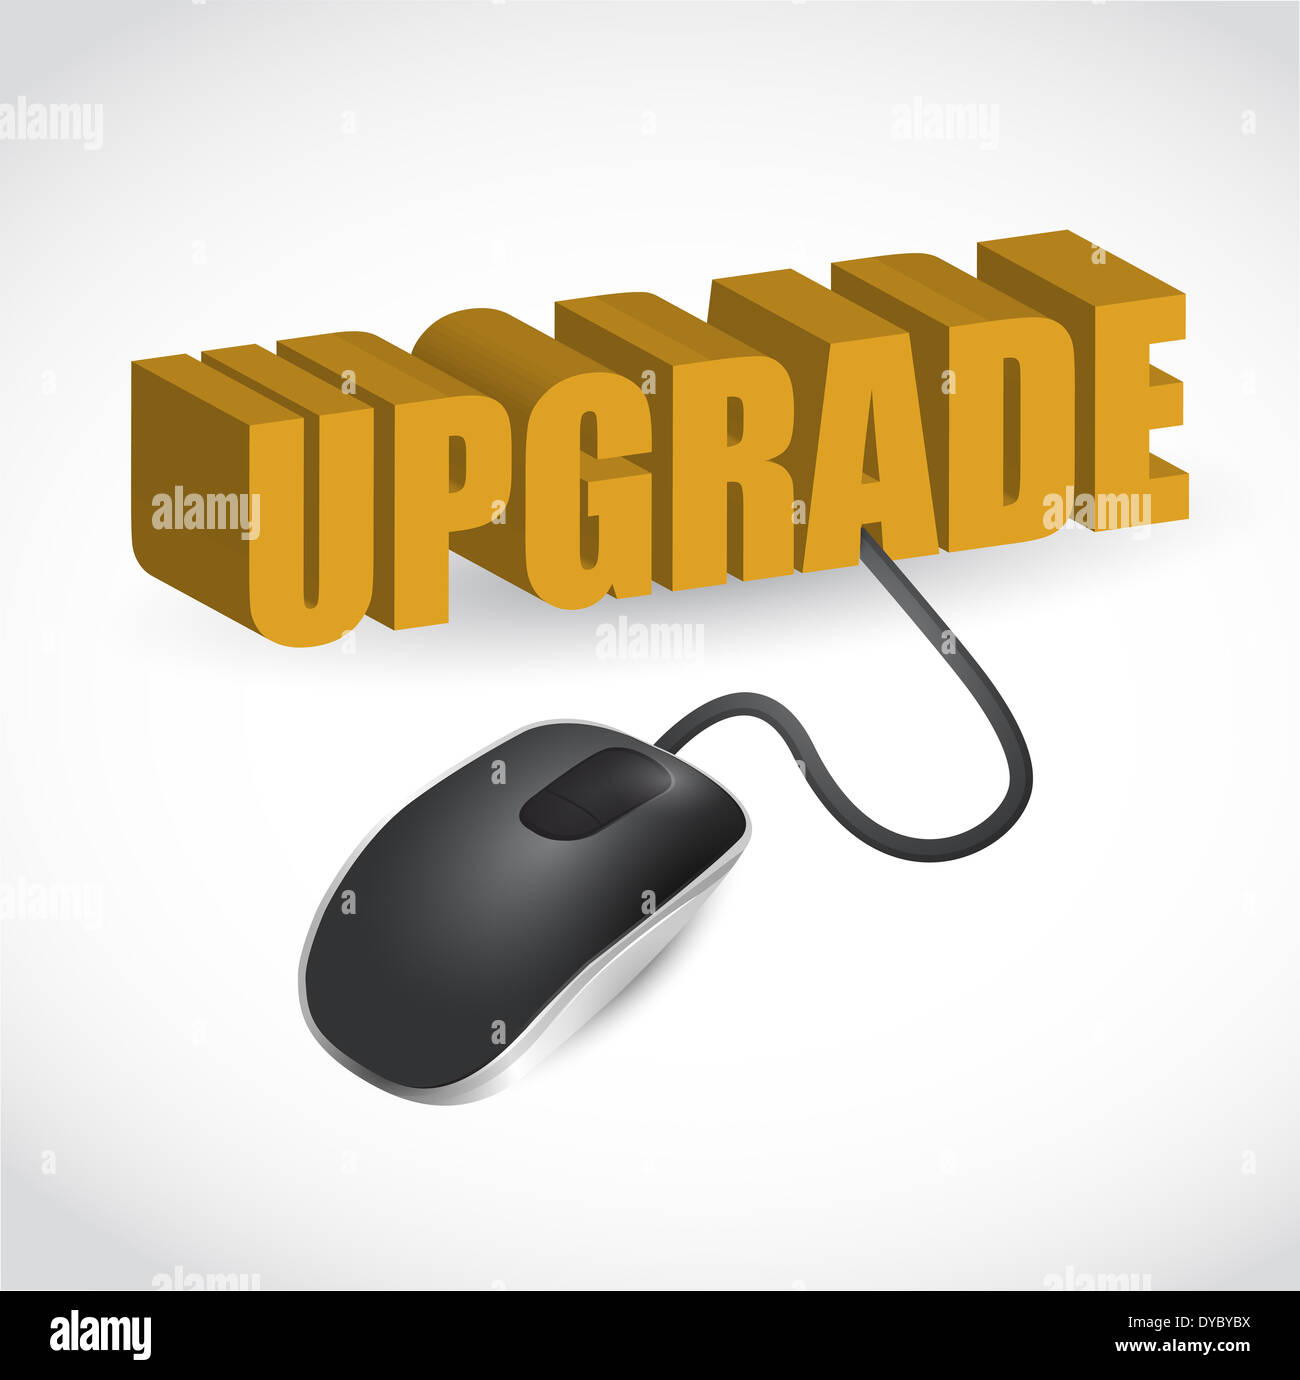 modern orange computer mouse connected to the orange word Upgrade Stock Photo